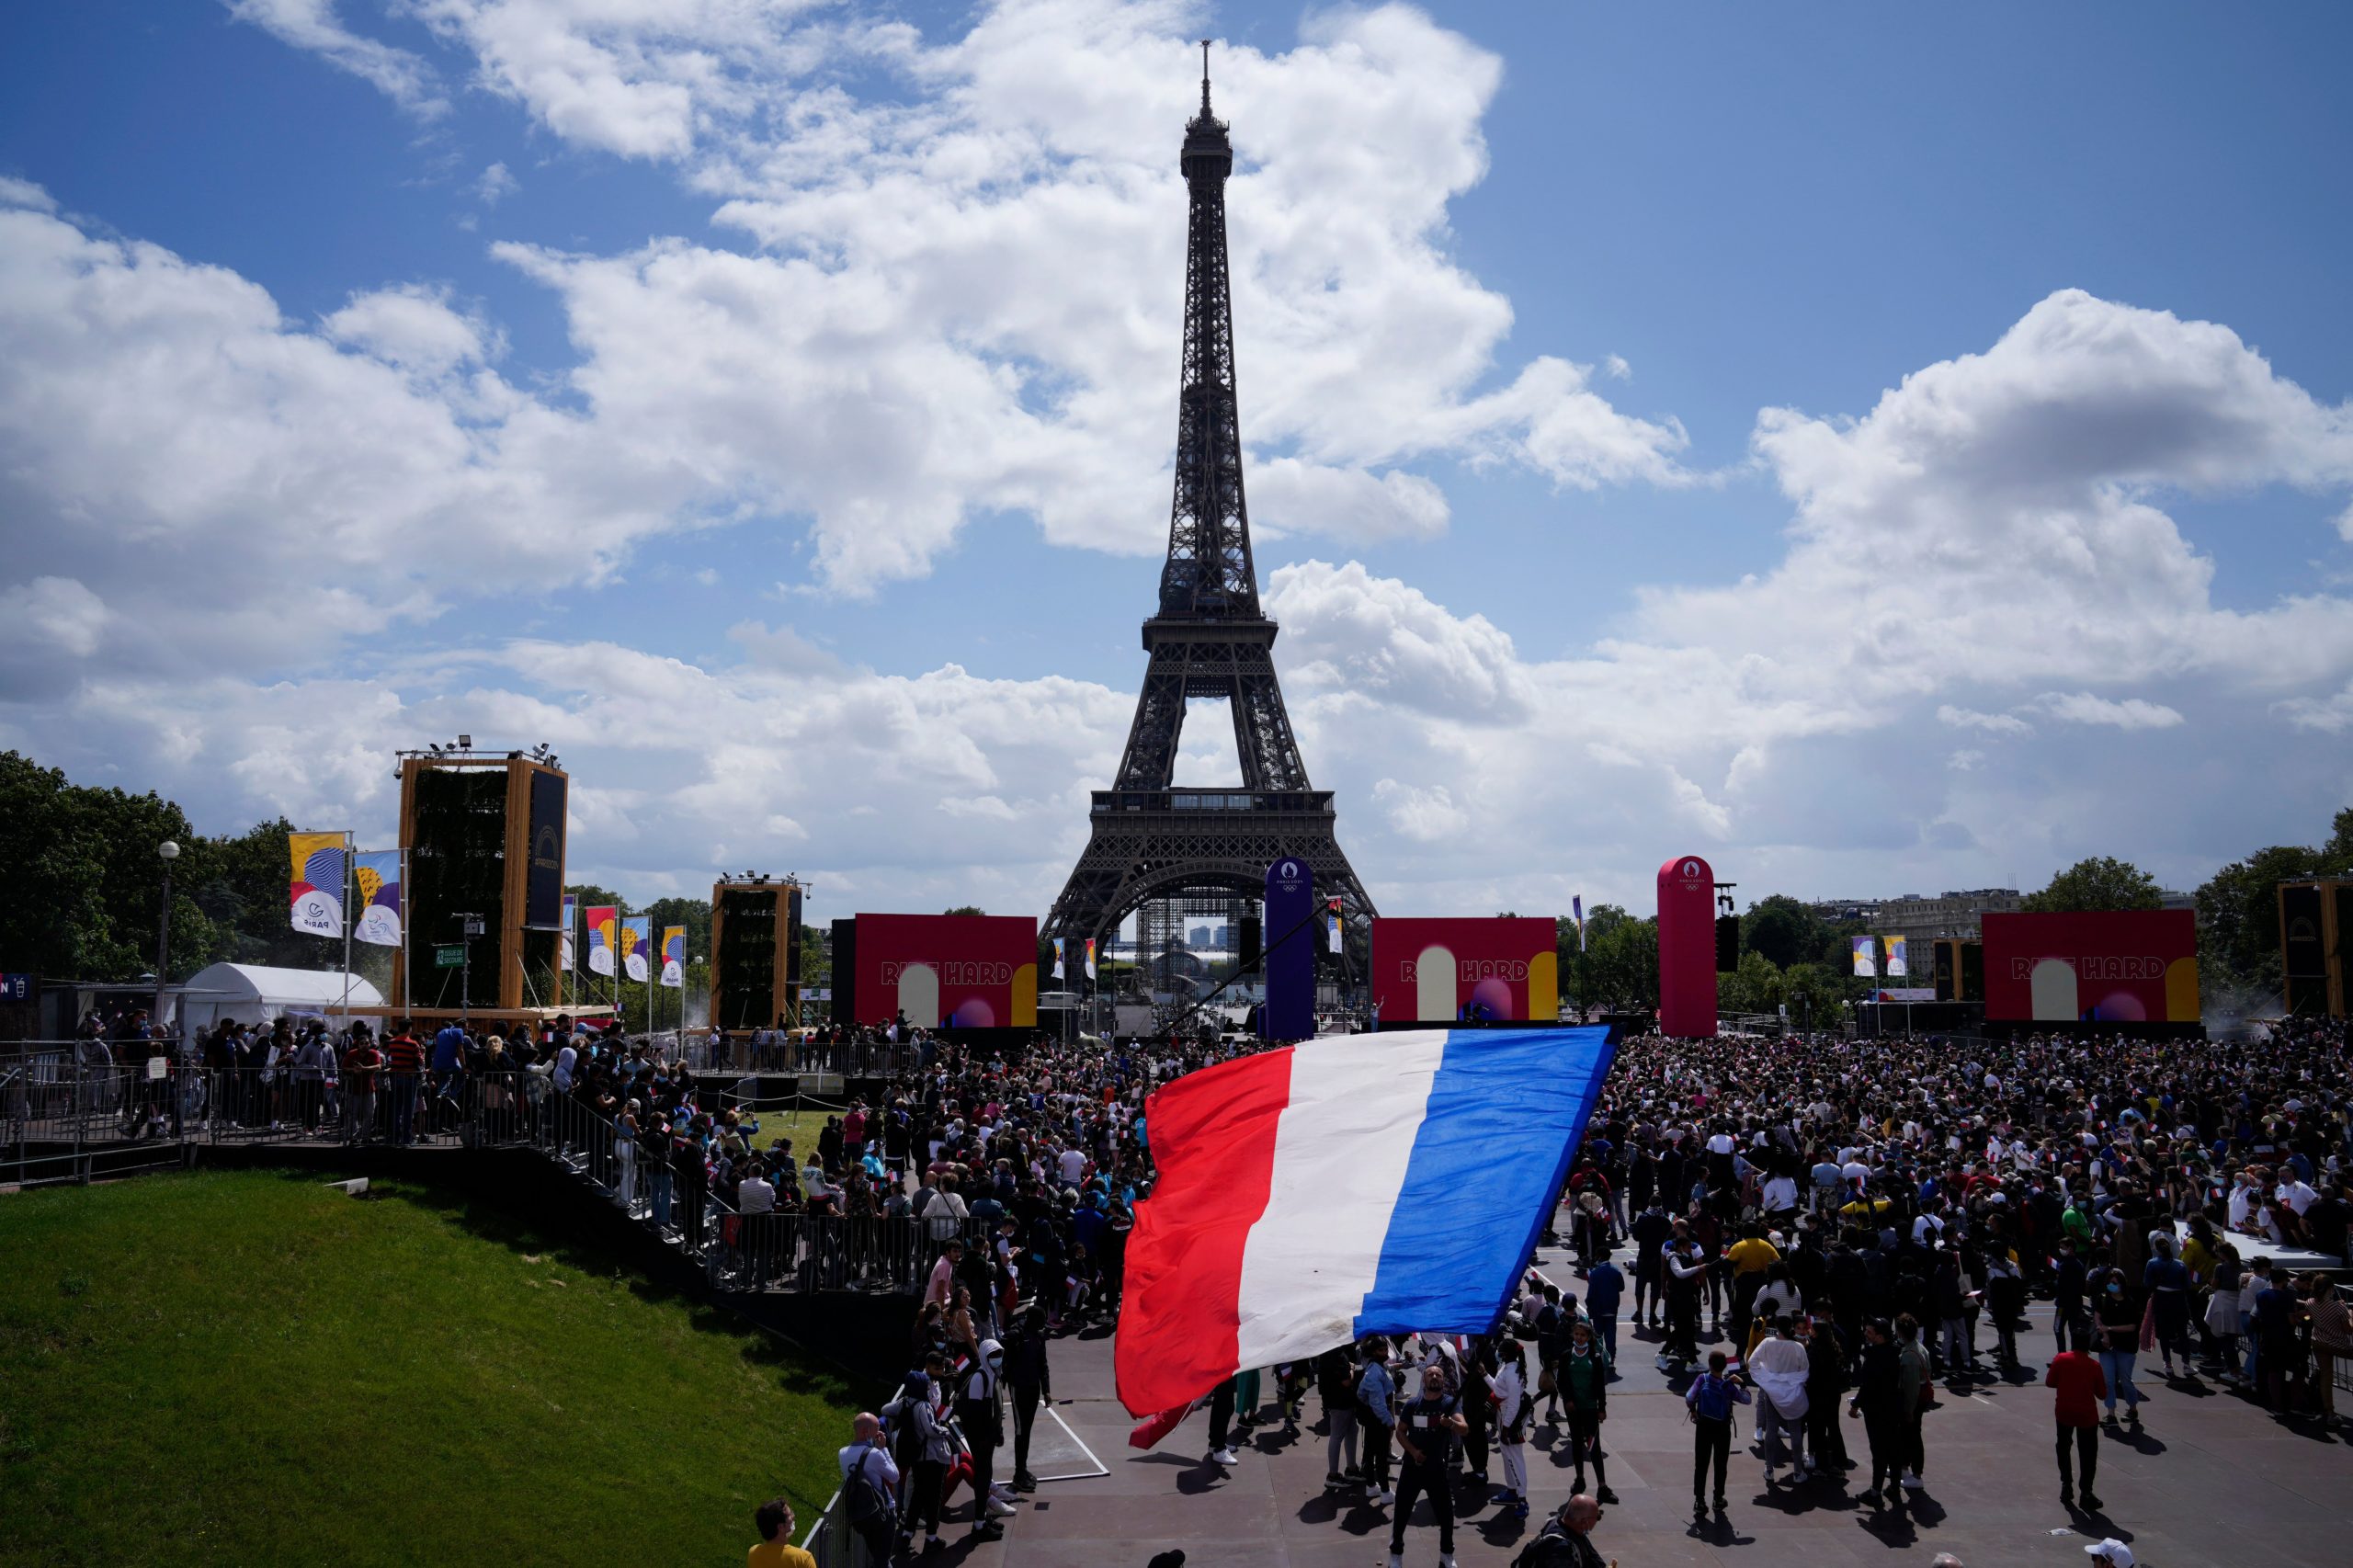 France changed its flag a year ago and no-one noticed